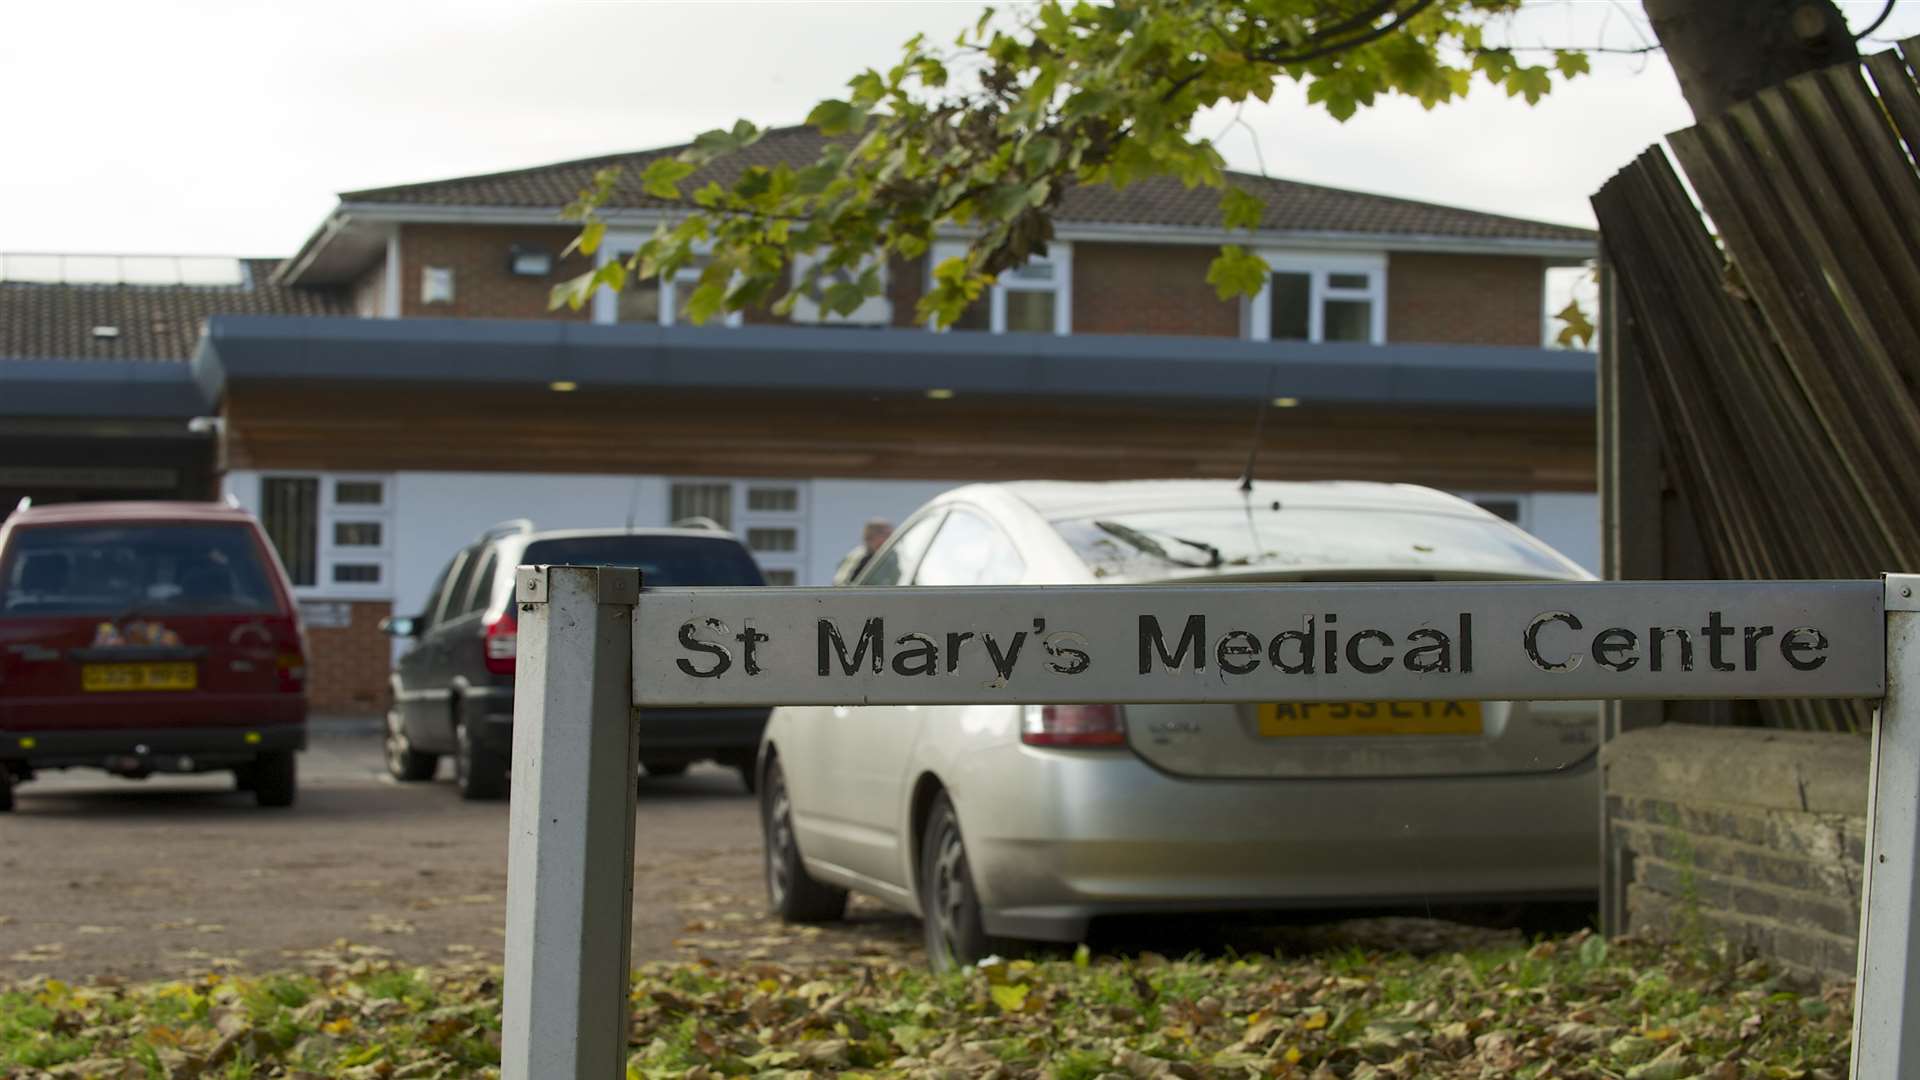 St Mary's Medical Centre, Strood